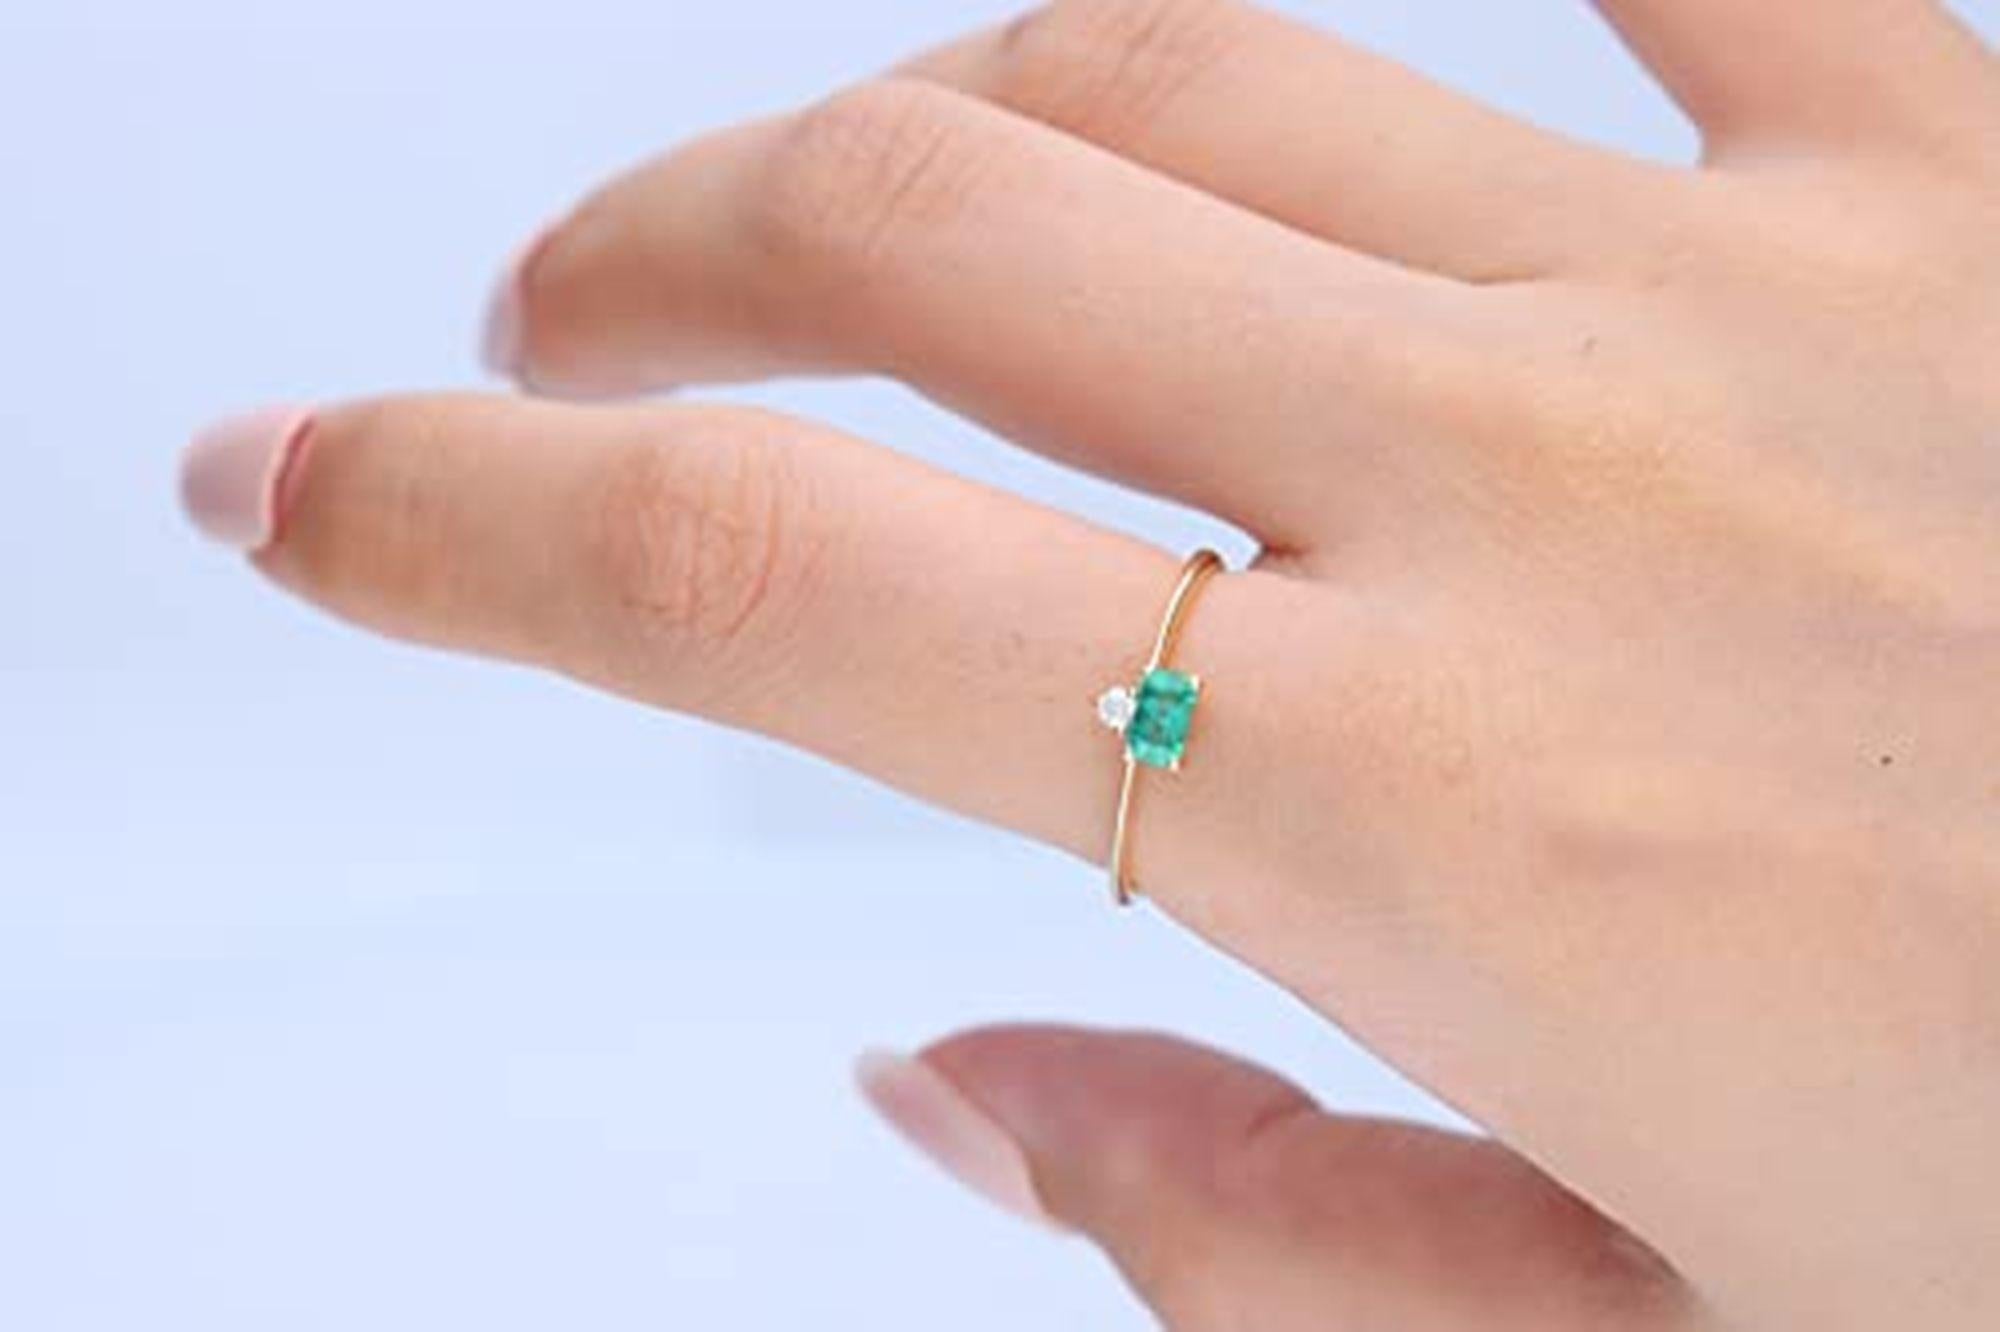 Stunning, timeless and classy eternity Unique ring. Decorate yourself in luxury with this Gin & Grace ring. The 14k Yellow Gold jewelry boasts 3x5 Emerald-cut Emerald (1 pcs) 0.33 Carat and Round-Cut Diamond (1 pcs) 0.04 Carat accent stones for a